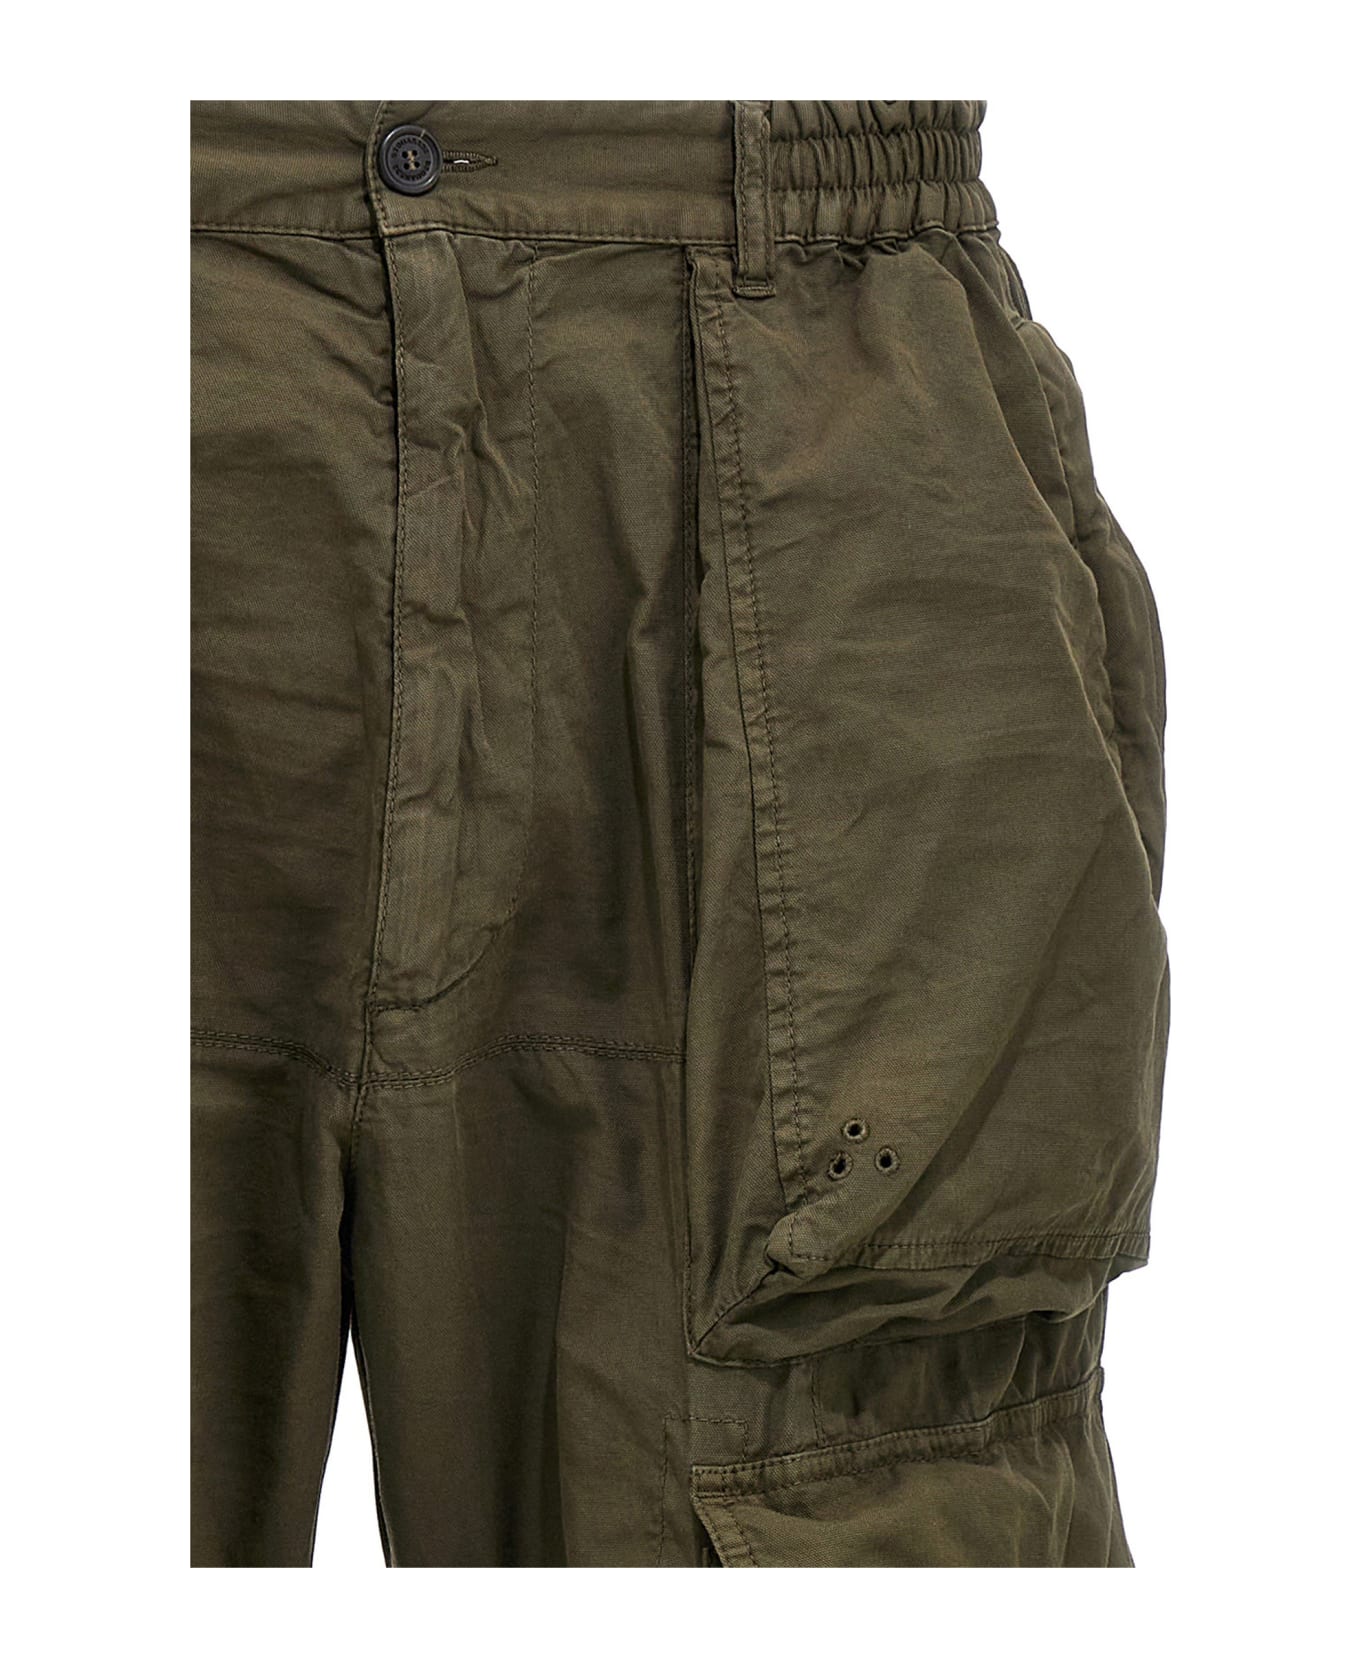 Dsquared2 Sport Cargo' Pants - Green